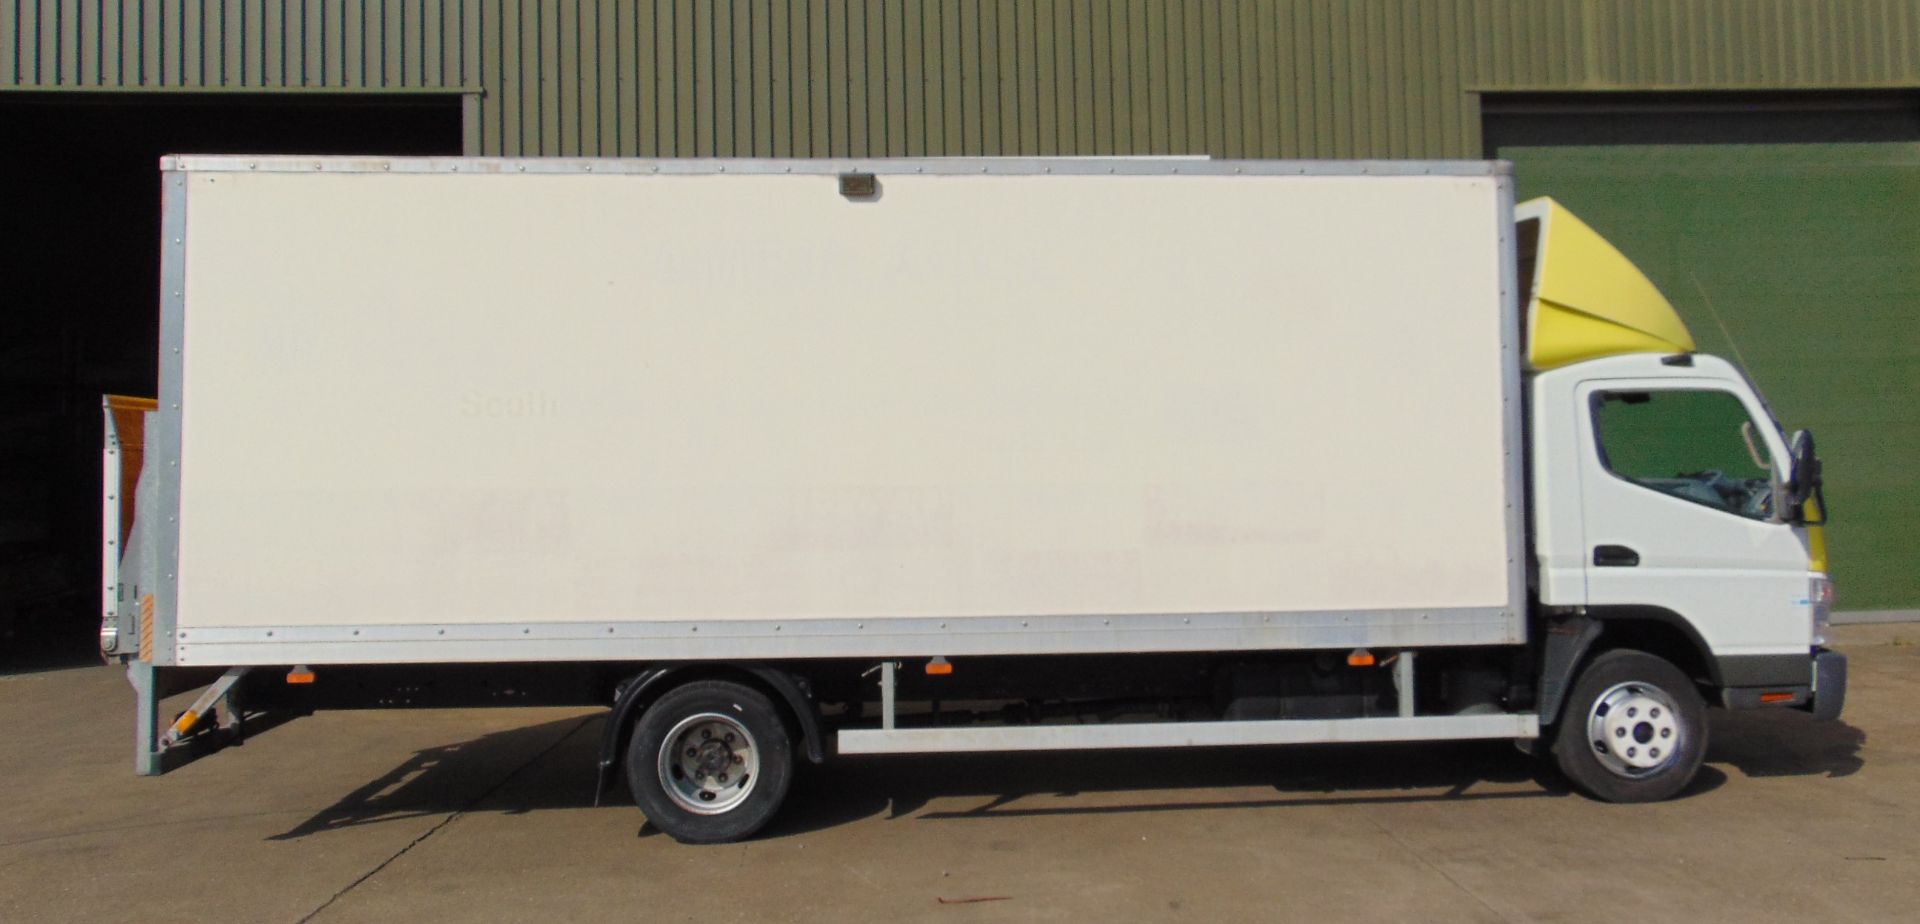 2011 Mitsubishi Fuso Canter Box lorry 7.5T - Only 5400 Miles! - Image 12 of 51